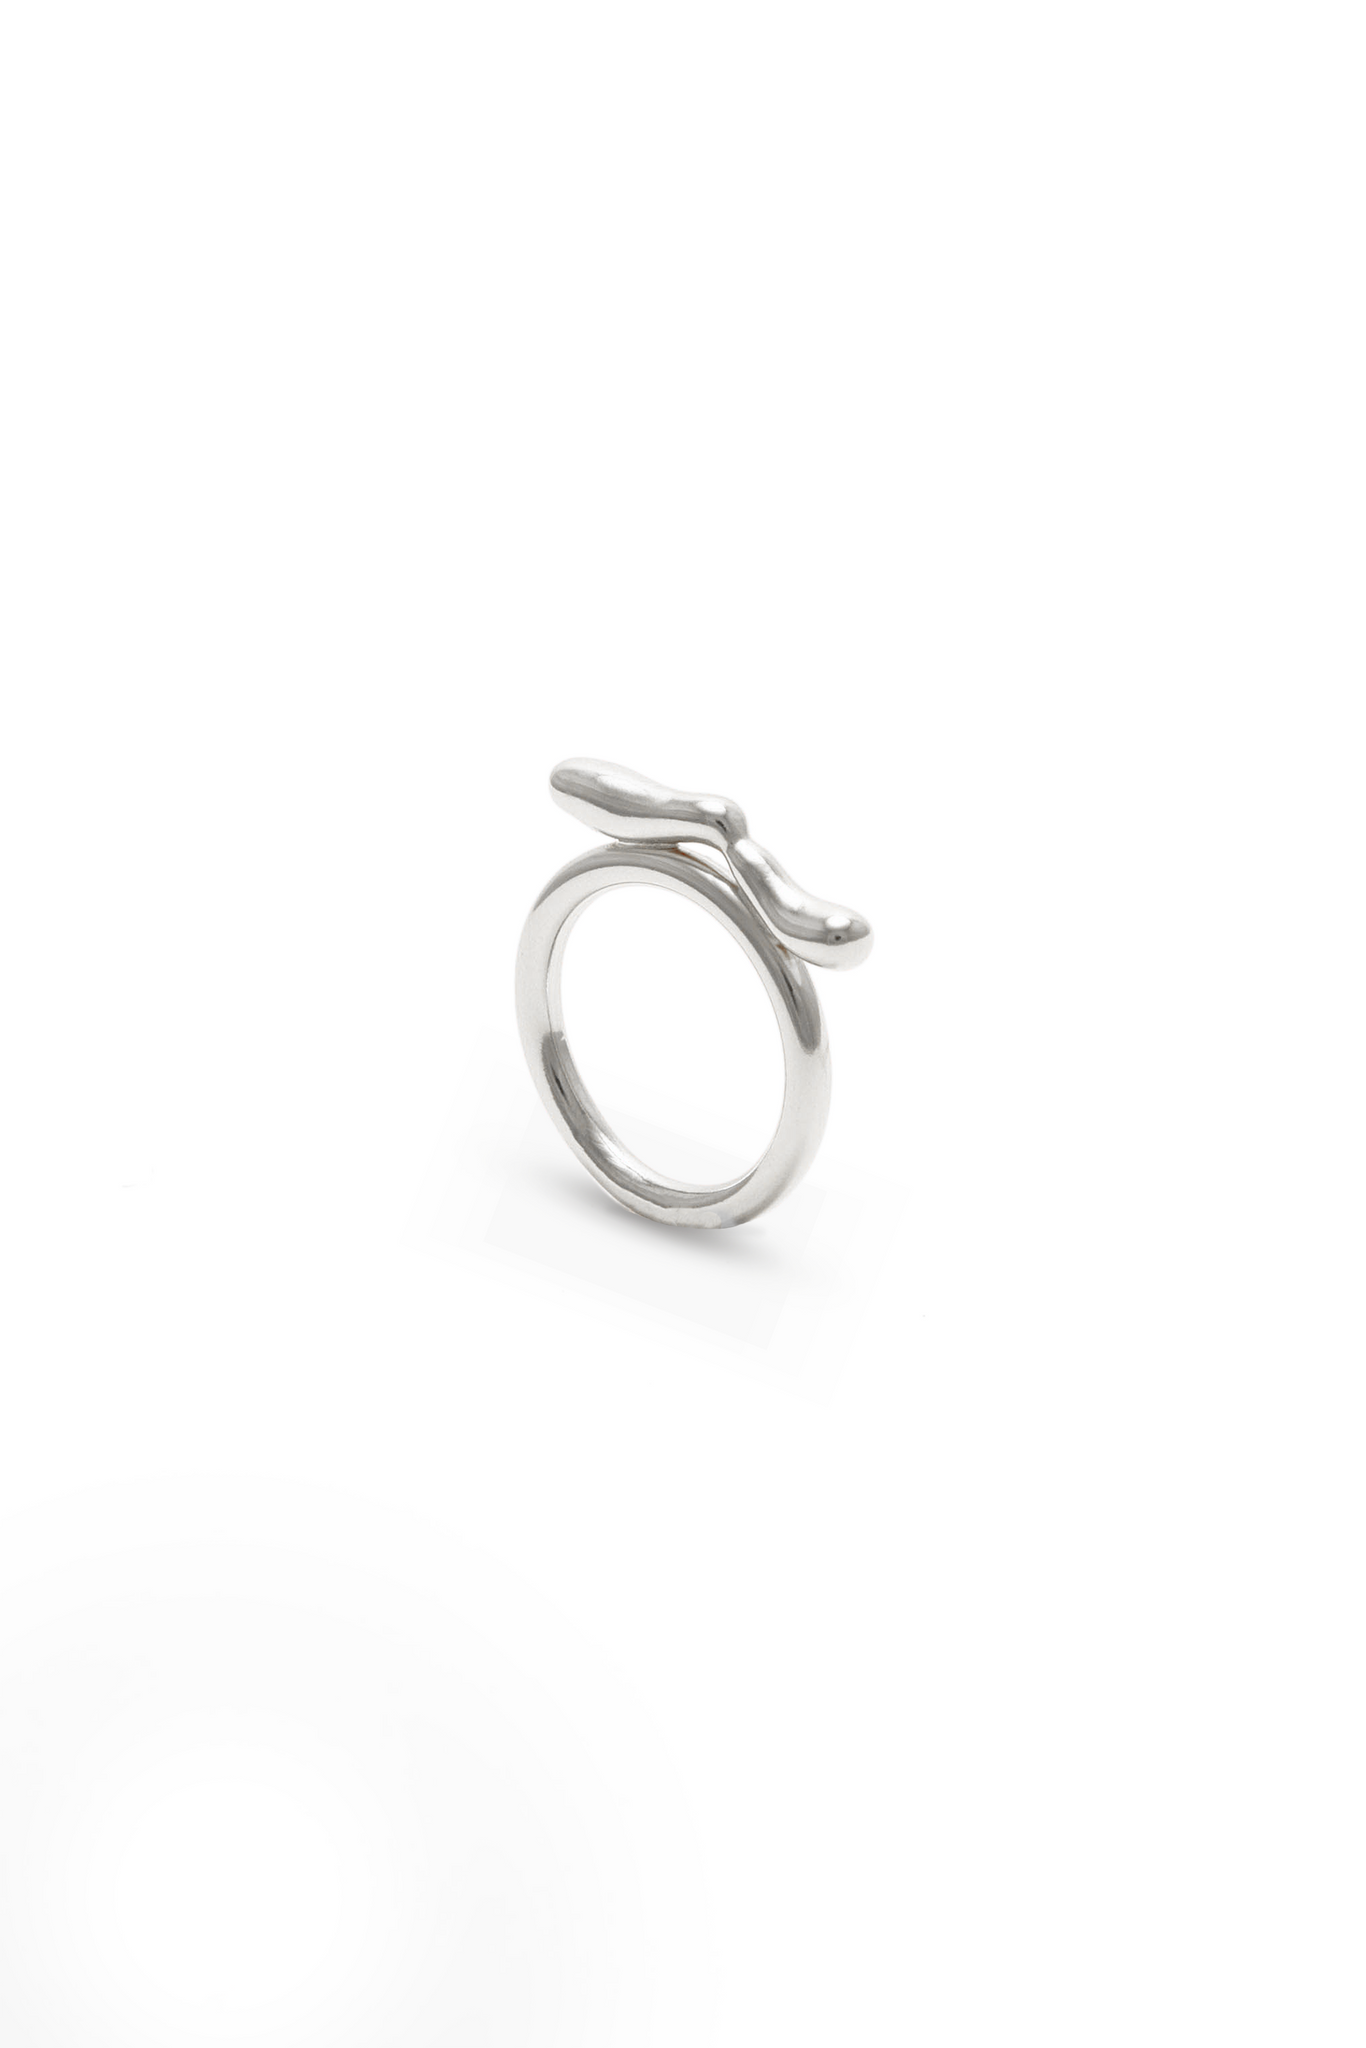 Sculptural eco friendly ring made from recycled silver